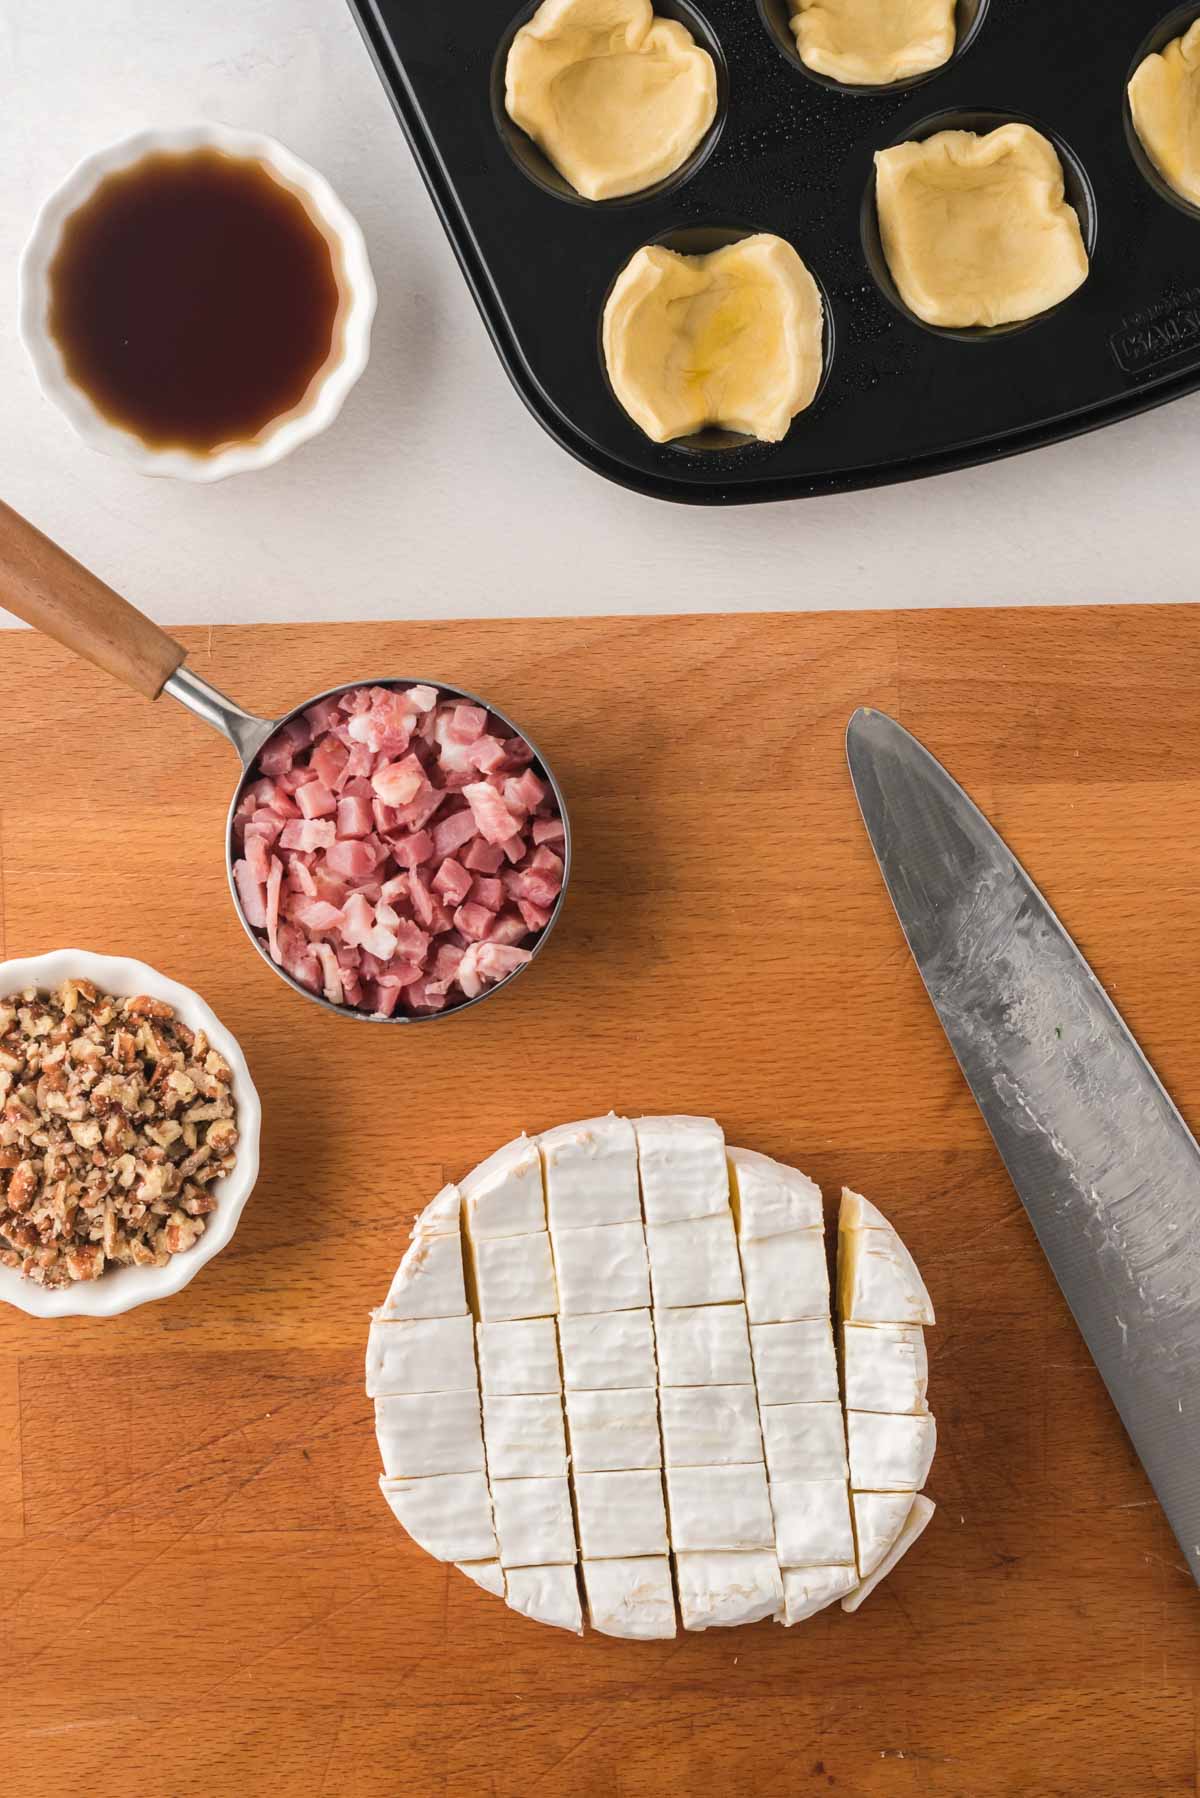 Brie cut into small pieces